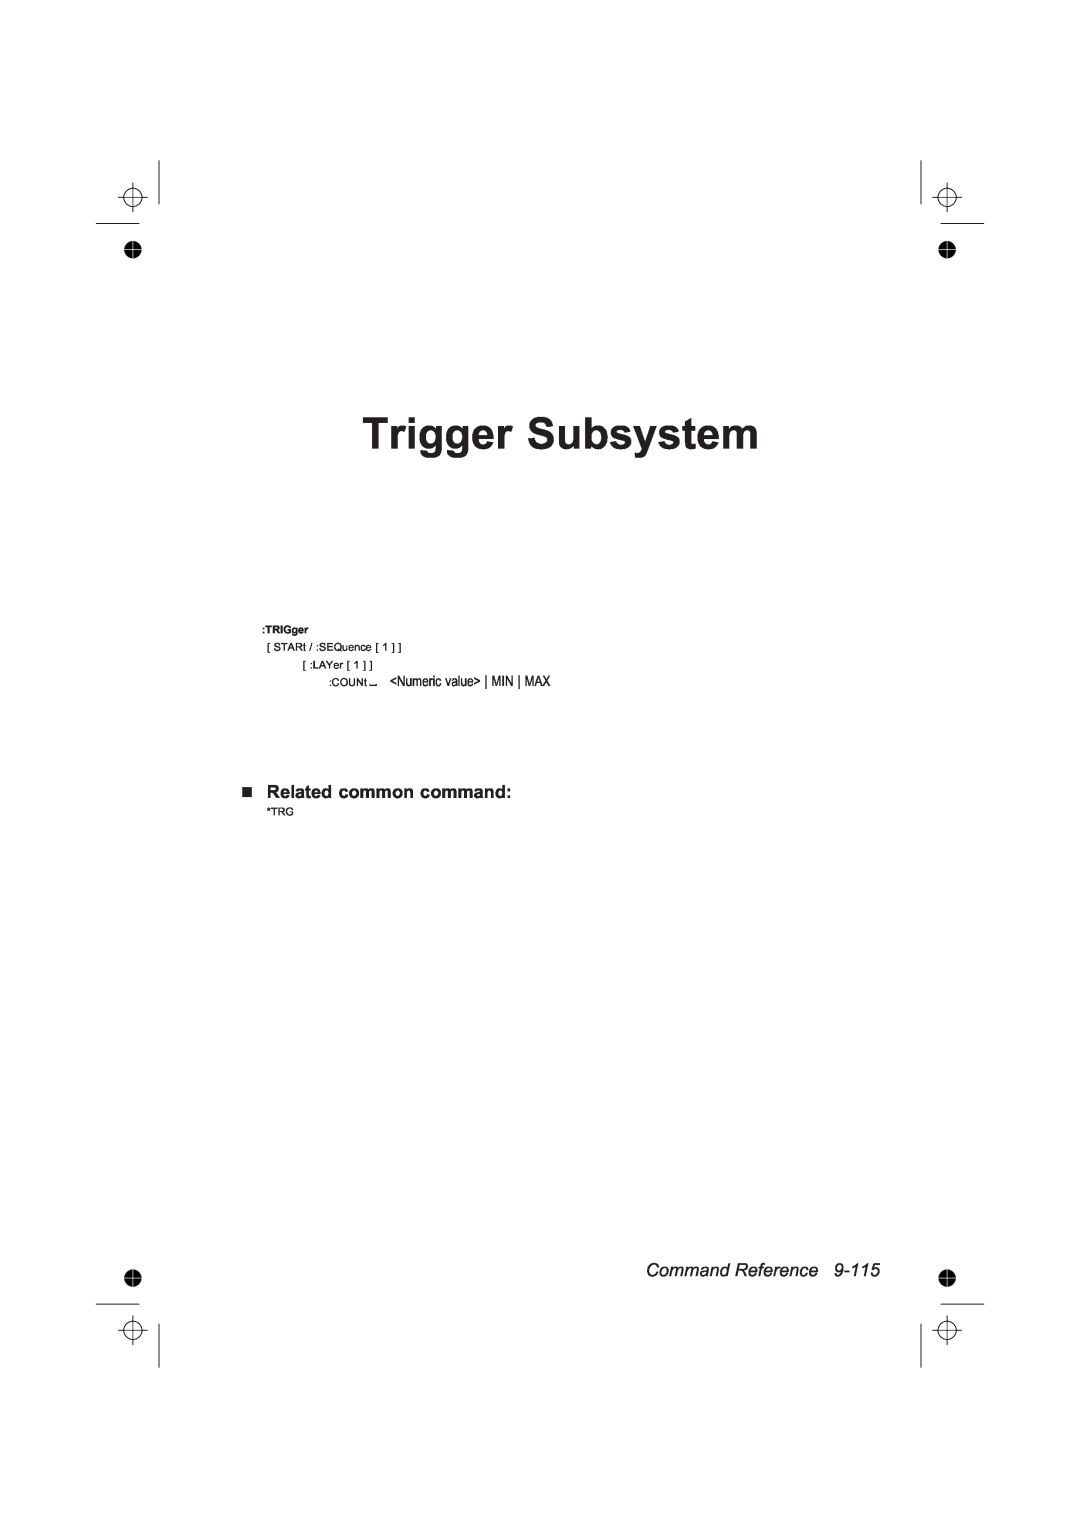 Fluke PM6681R manual Trigger Subsystem, Related common command, Command Reference, COUNt Numeric value MIN MAX, TRIGger 